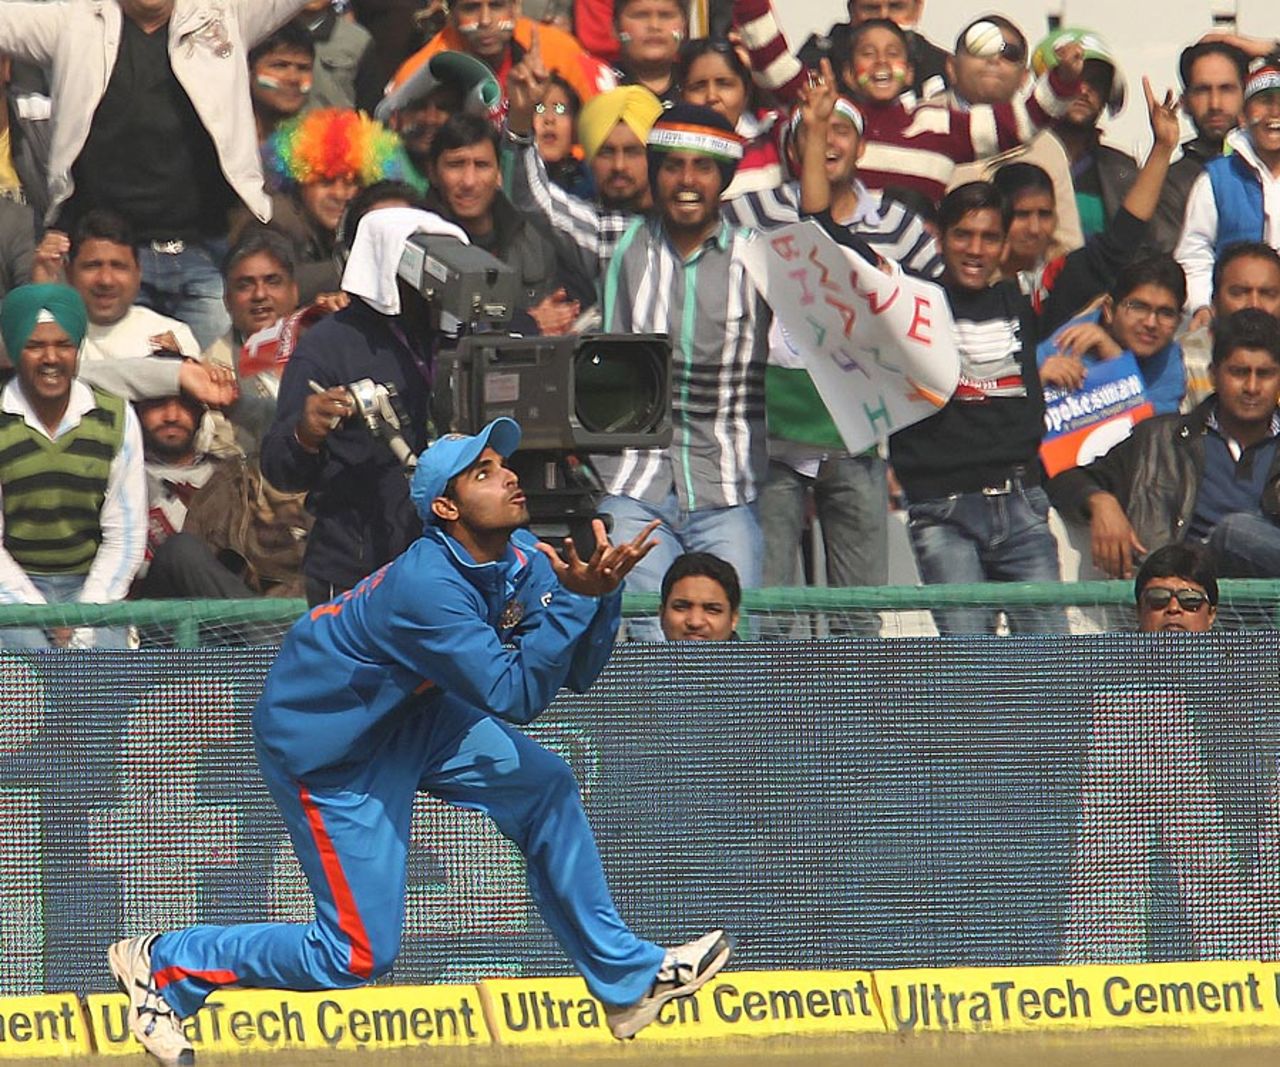 Bhuvneshwar Kumar prepares to hold a catch and is cheered by fans, India v England, 4th ODI, Mohali, January 23, 2013